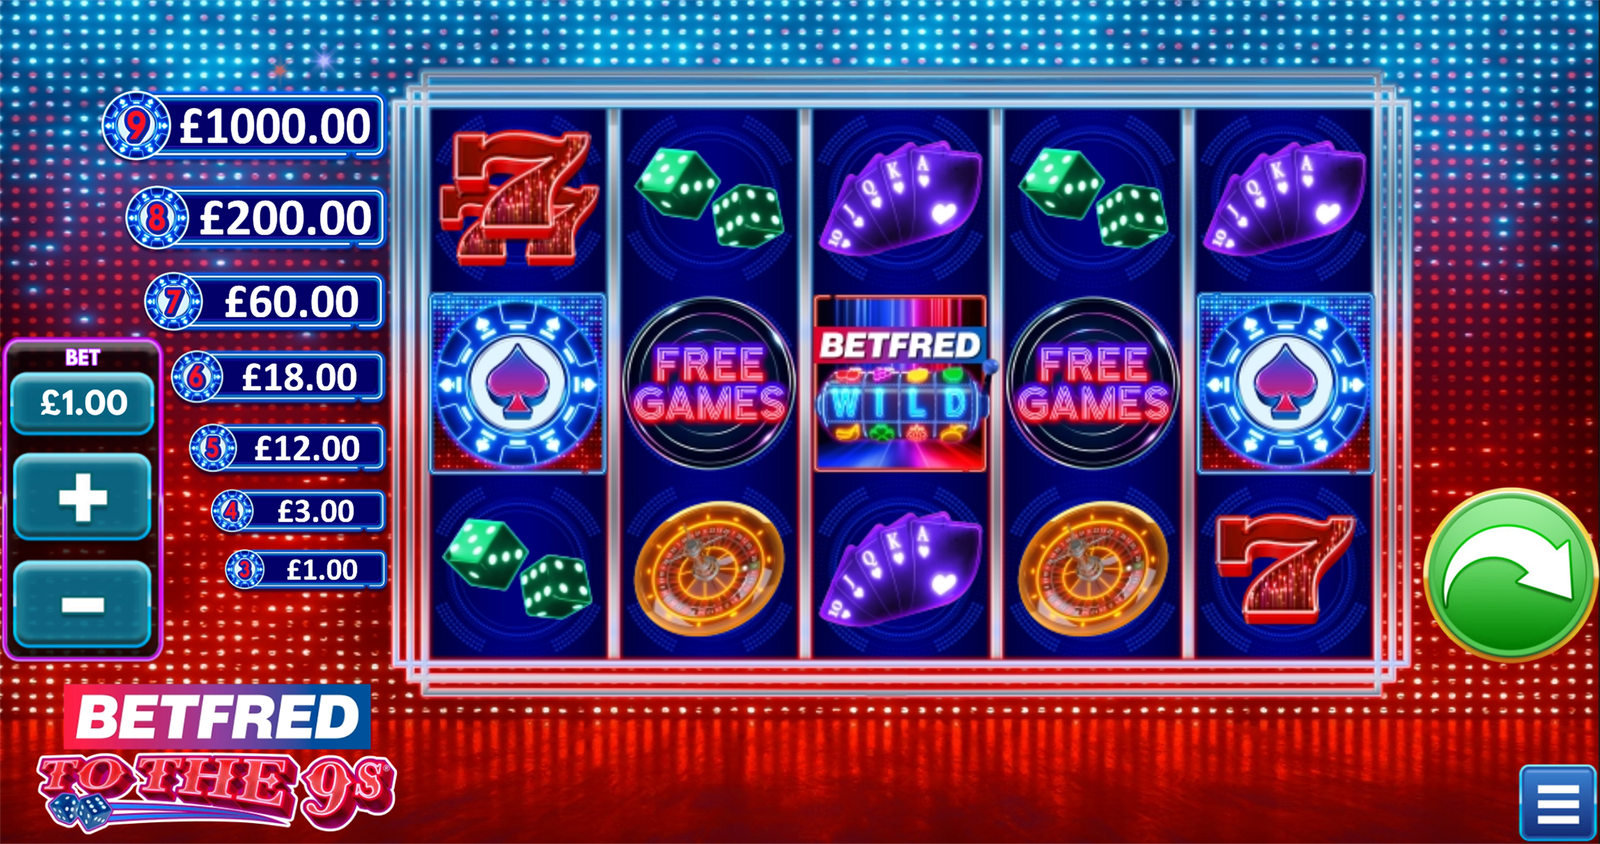 Betfred to the 9s: Try out our new exclusive slot